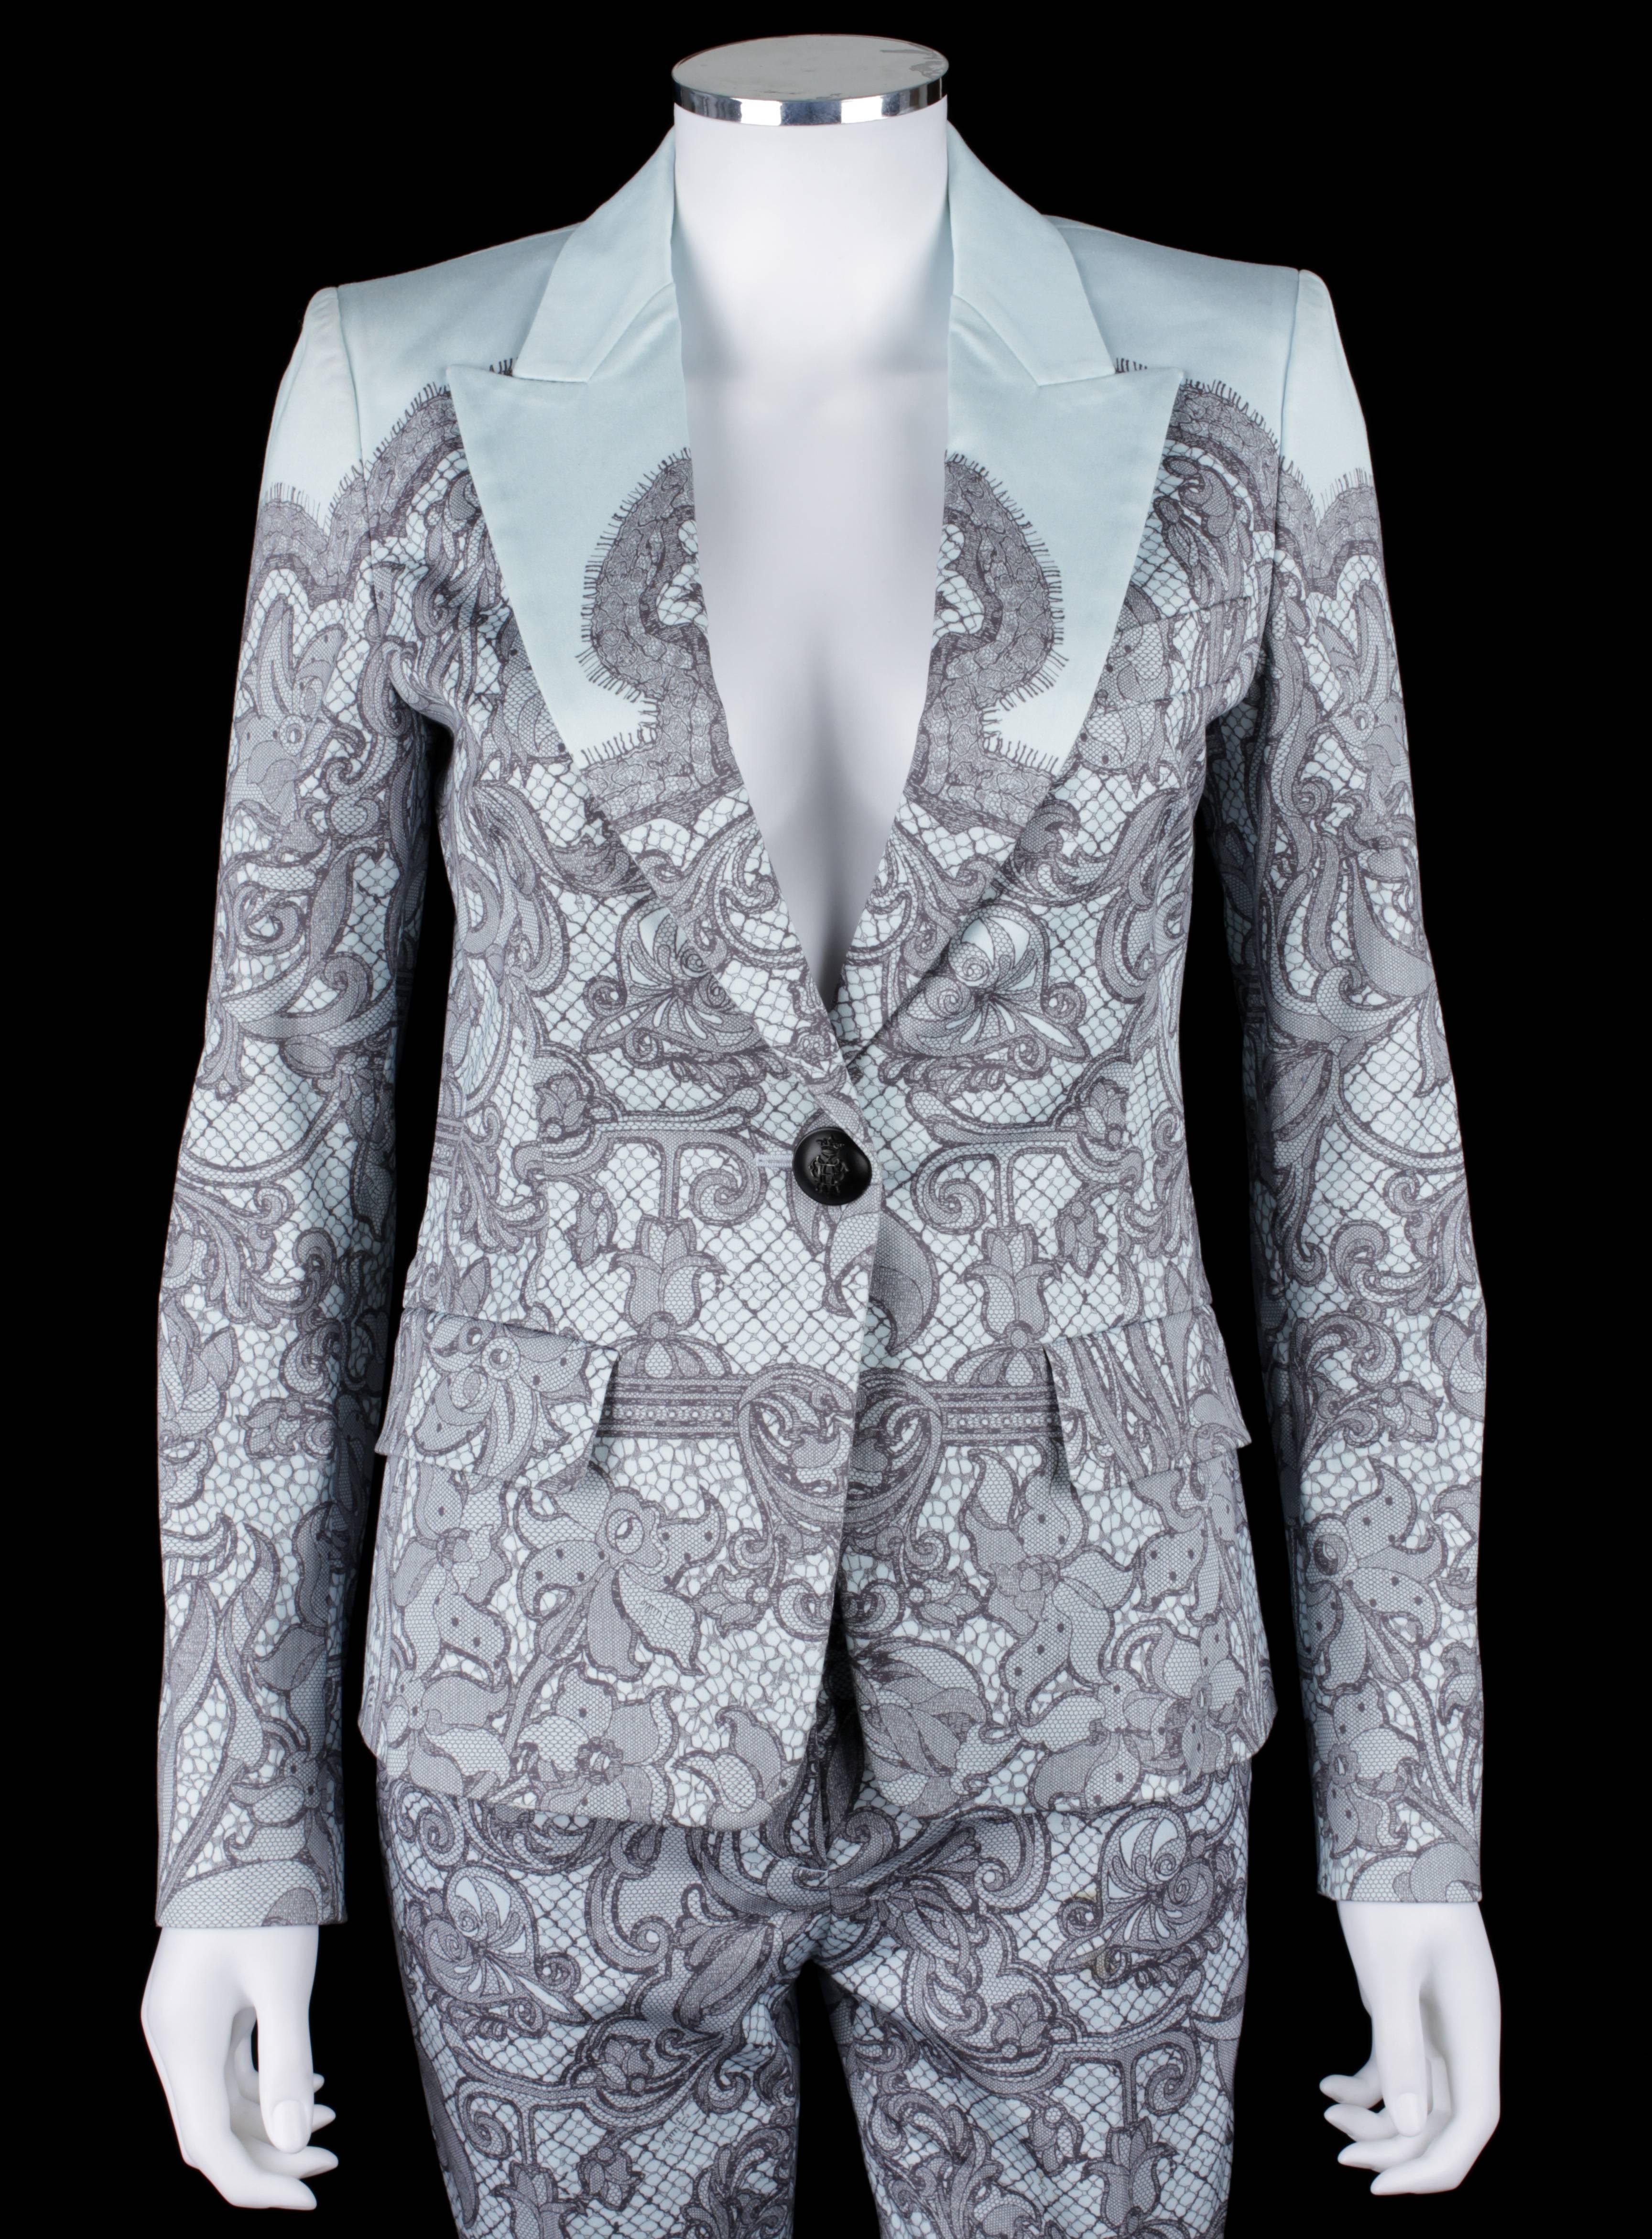 Emilio Pucci two piece pale blue lace print pantsuit. Blazer has a single front button closure. Three button detail on cuffs. Two flap pockets and one faux pocket at chest (original stitching has not yet been removed). Peak lapel. Padded shoulders.